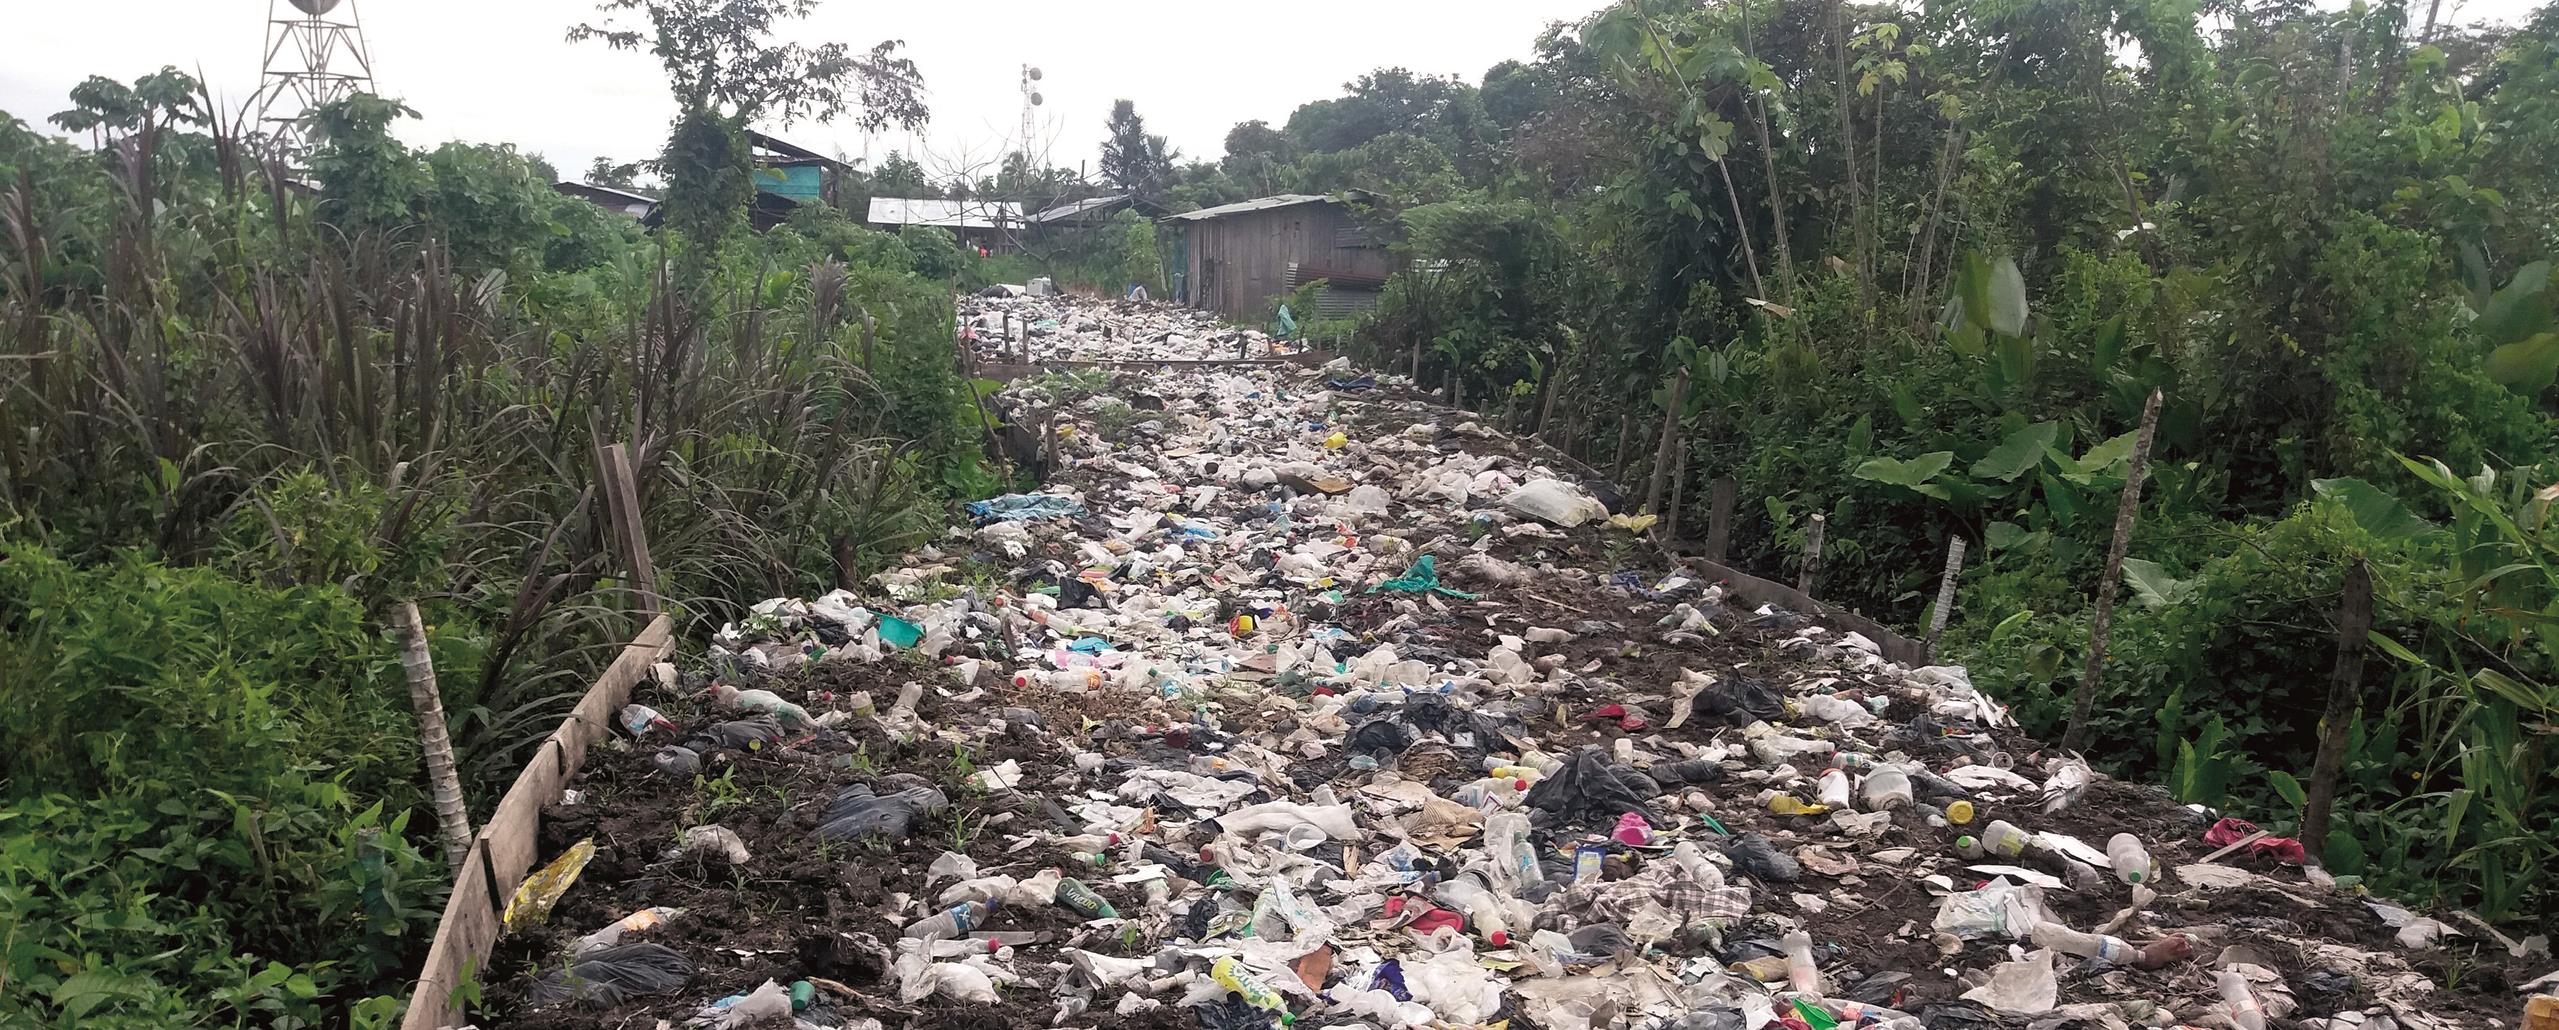 Waste scattered across all of the street in one of Colombia's isolated municipalities